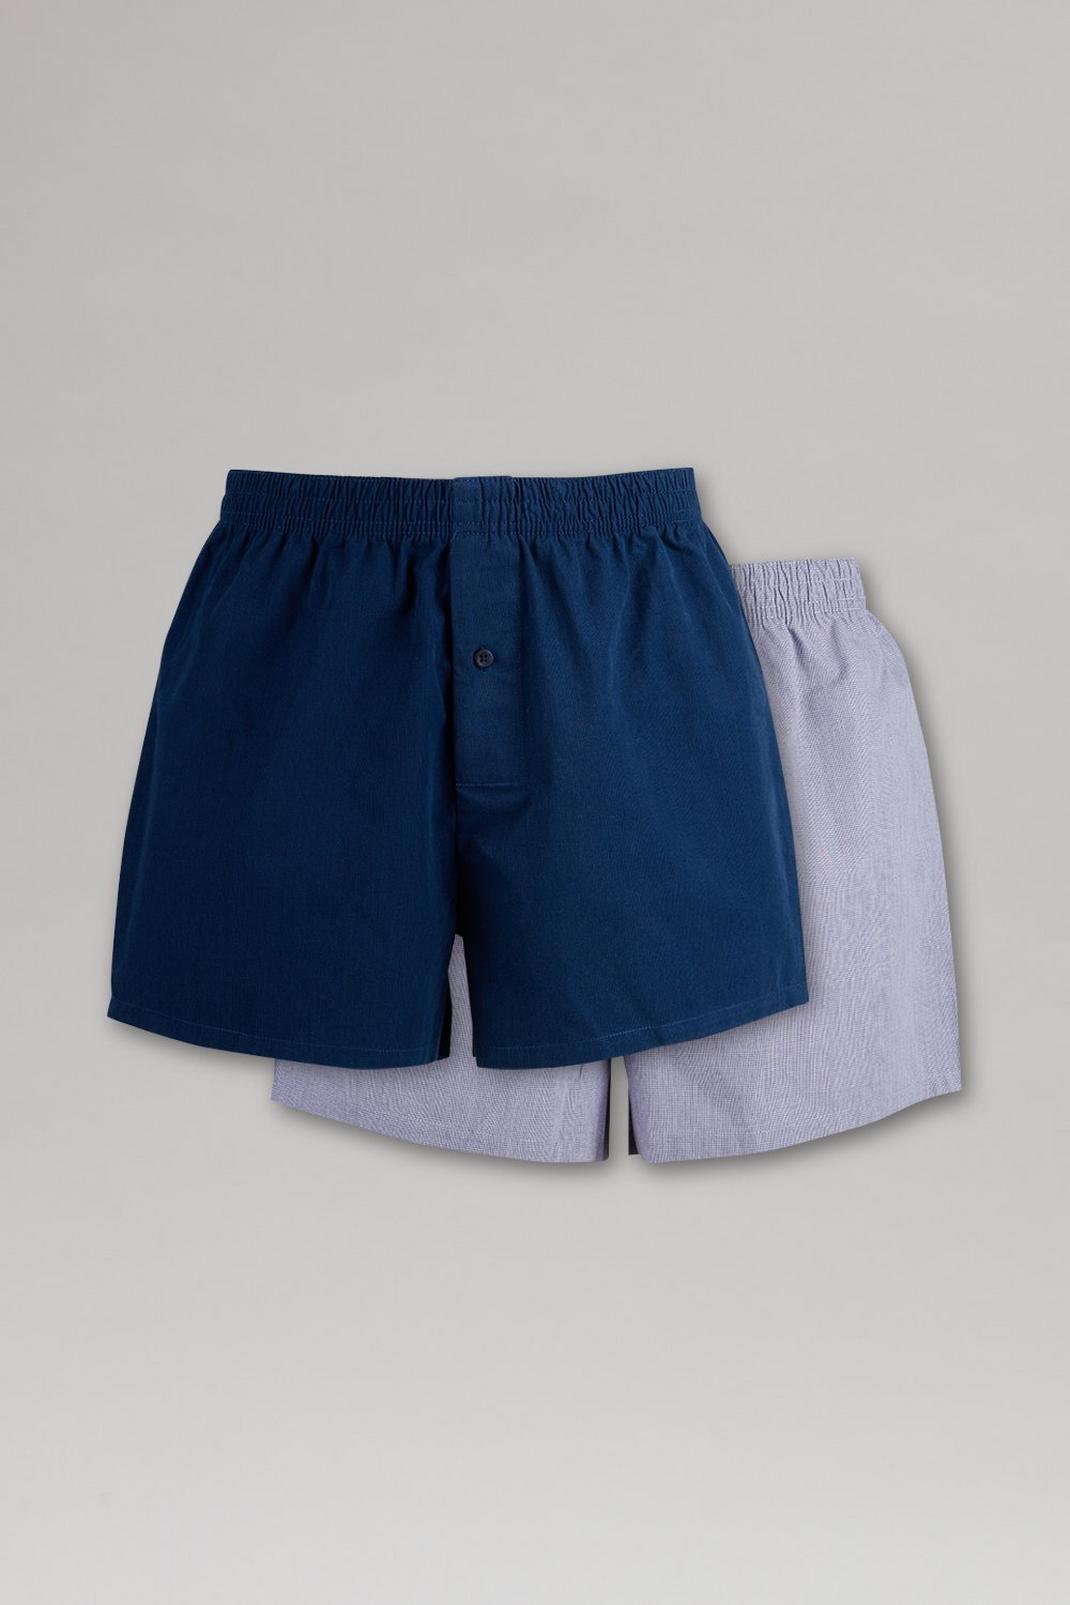 106 2 Pack Woven Blue Semi Plain Boxers image number 1